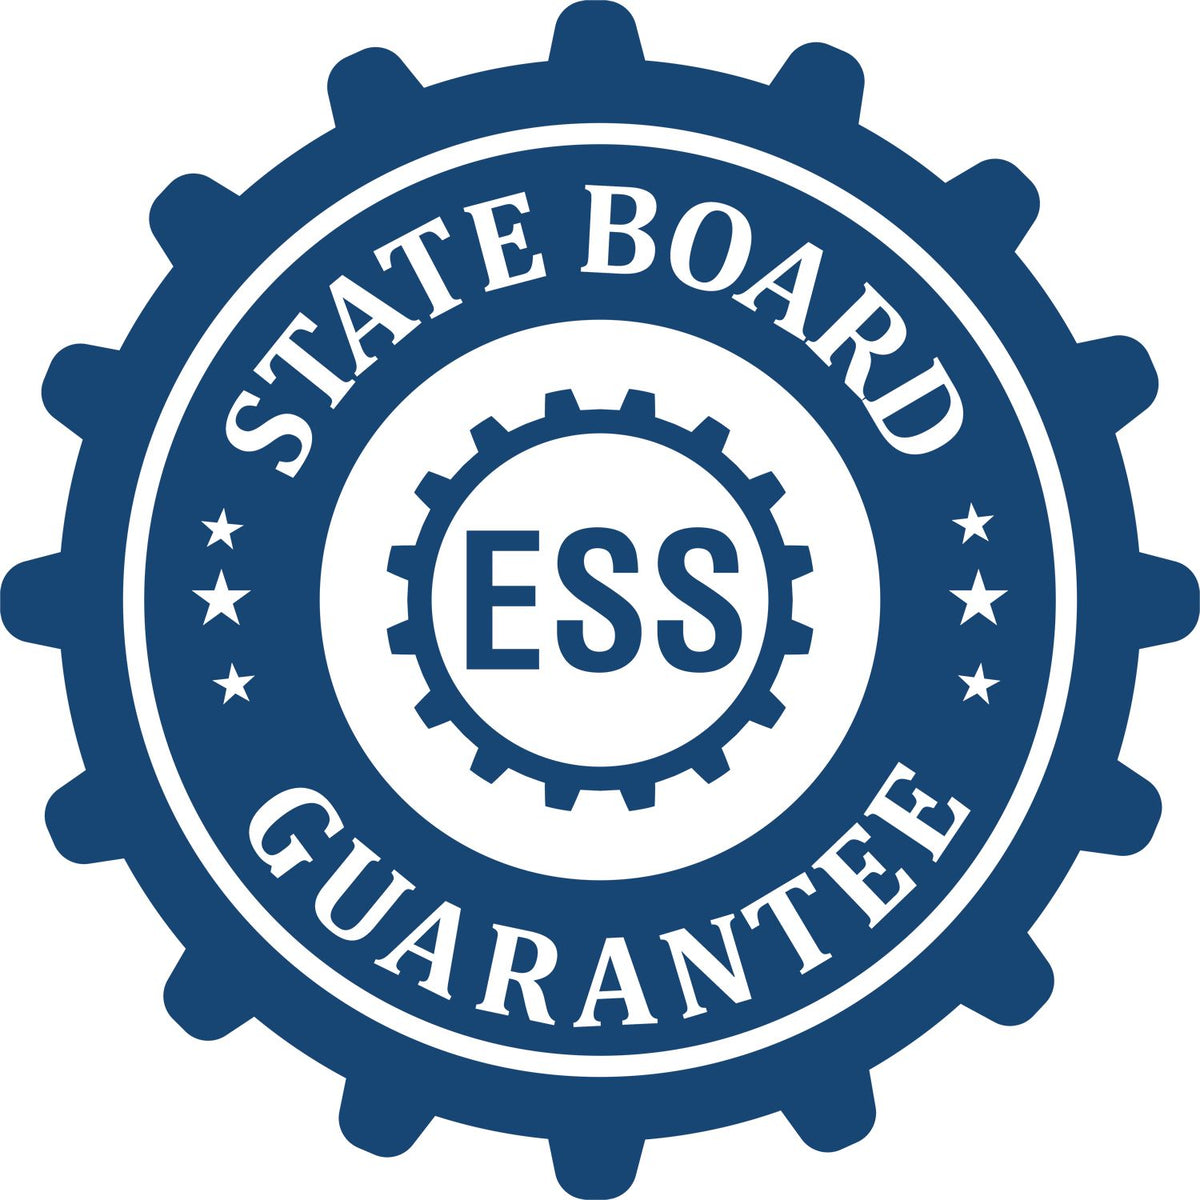 An emblem in a gear shape illustrating a state board guarantee for the Handheld Connecticut Professional Geologist Embosser